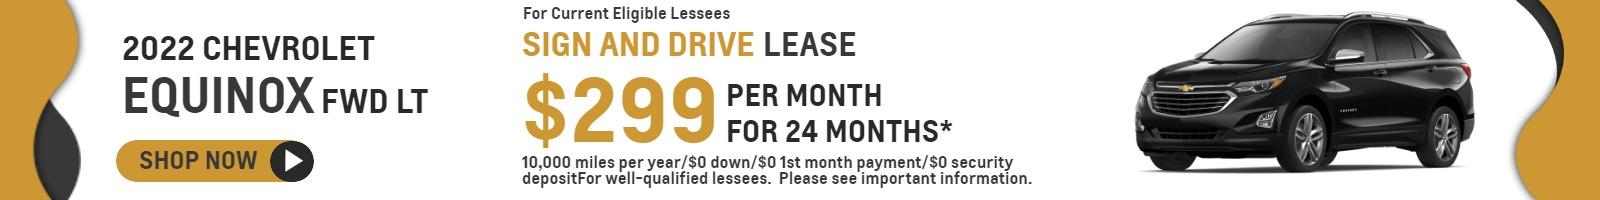 2022 Chevrolet Equinox FWD LT
For Current Eligible Lessees
Sign and Drive
Lease $299/month* for 24 months*
10,000 miles per year/$0 down/$0 1st month payment/$0 security deposit
For well-qualified lessees.  Please see important information.